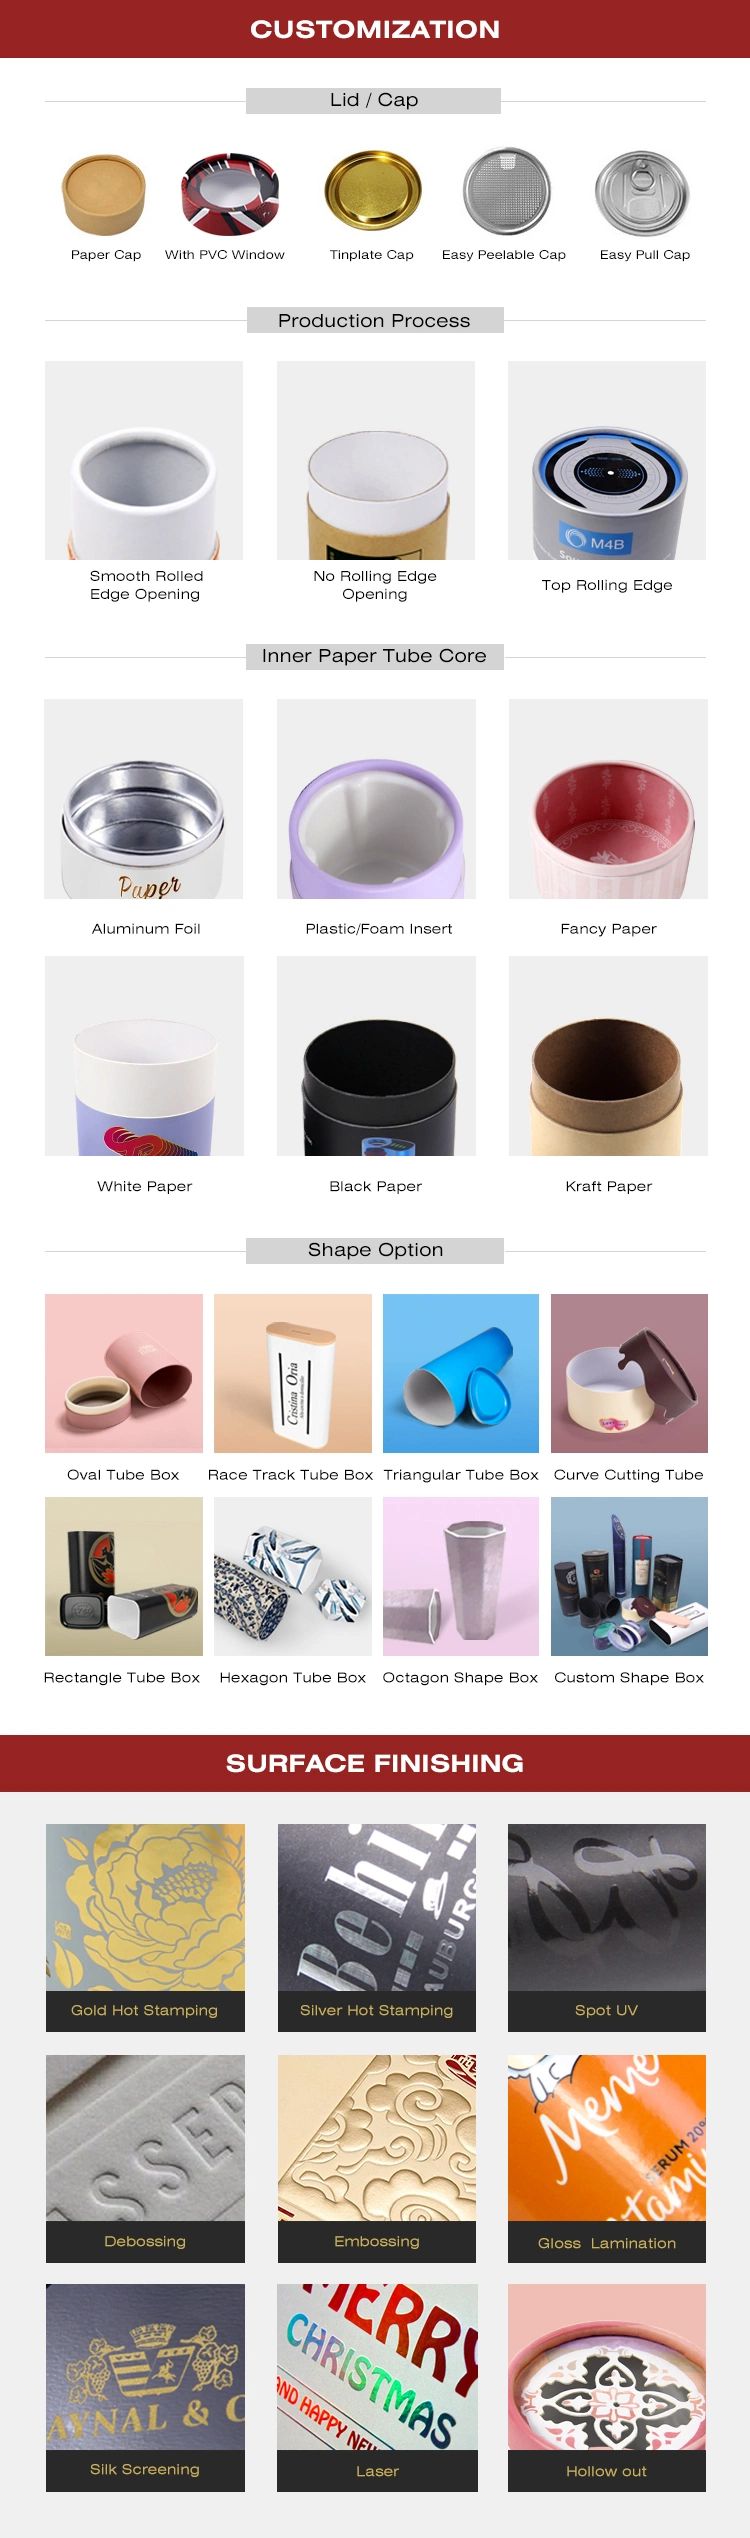 Firstsail Custom Gift Lip Balm Ties Belts Hair Accessories Scarves Wax Soy Soap Candle Jar Spice Tea Candy Coffee Paper Tube Packaging